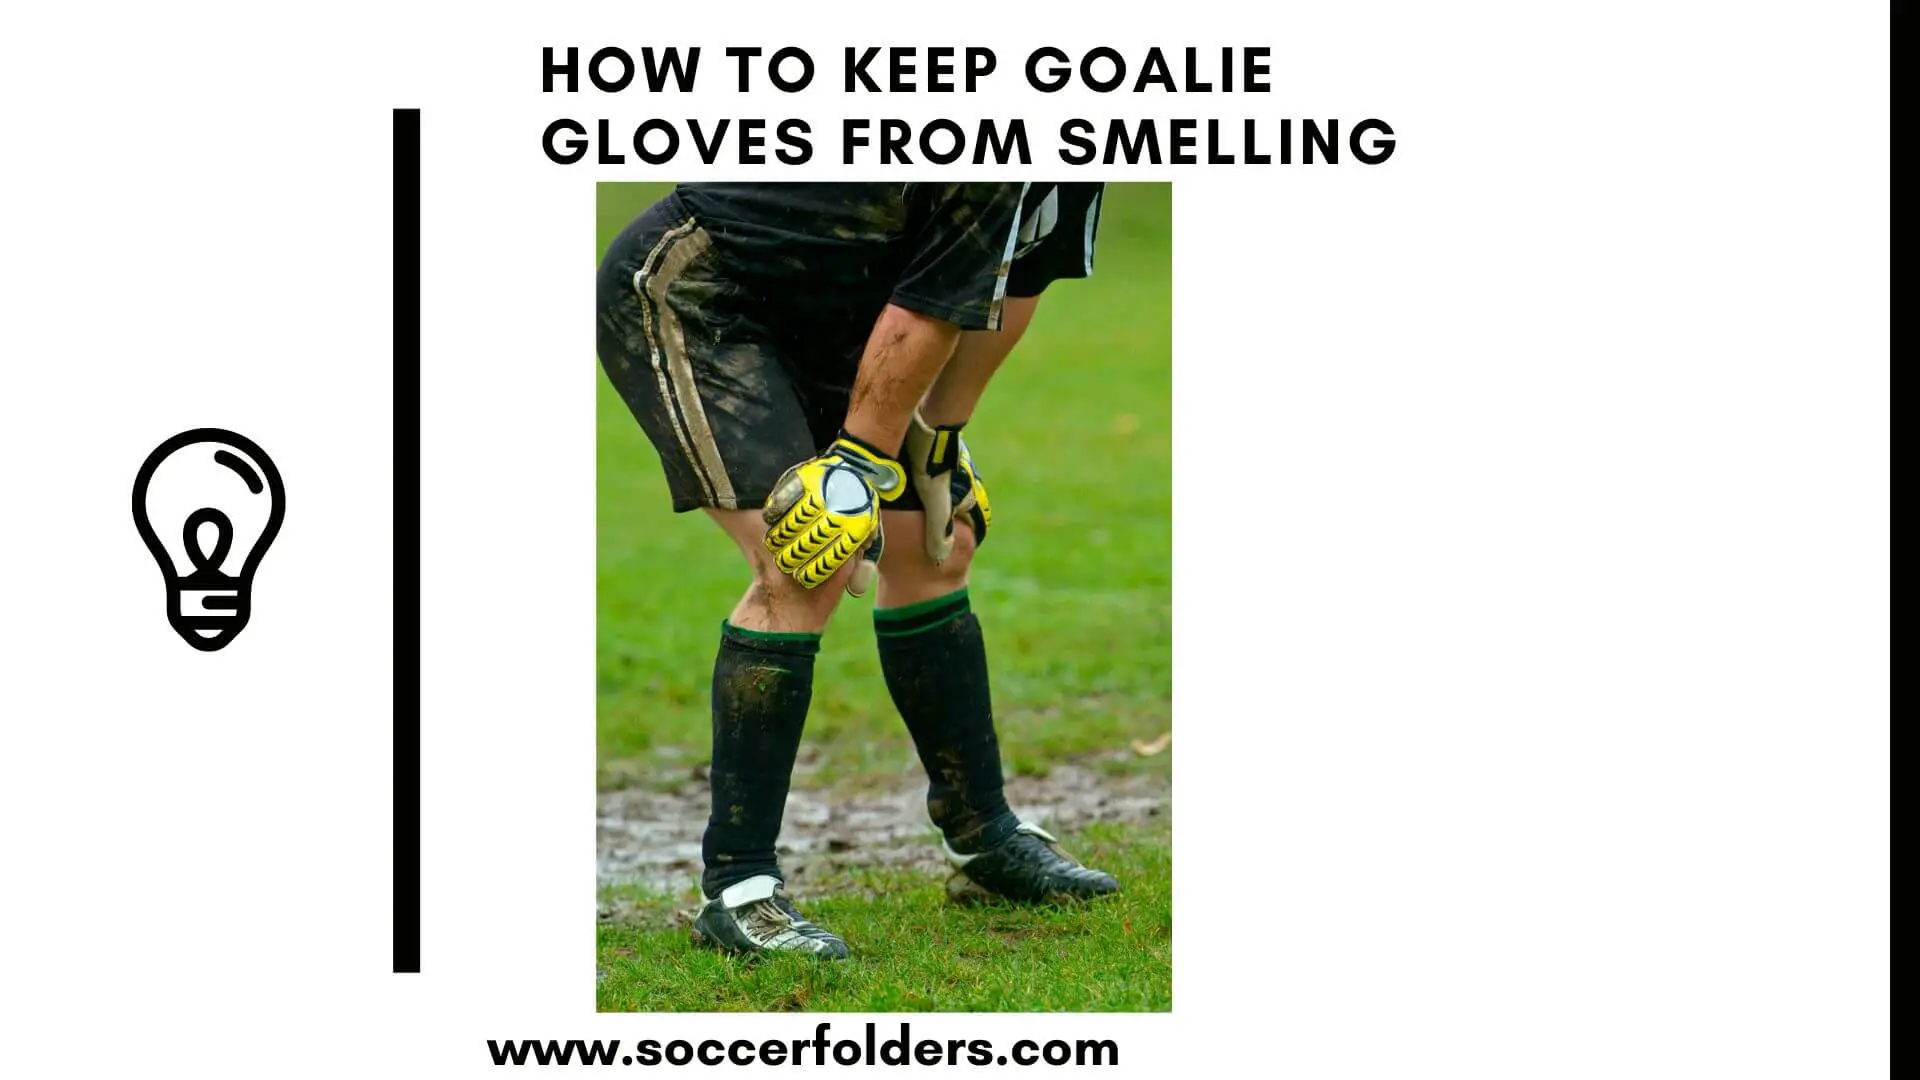 How to Keep Goalie Gloves from Smelling - Featured Image